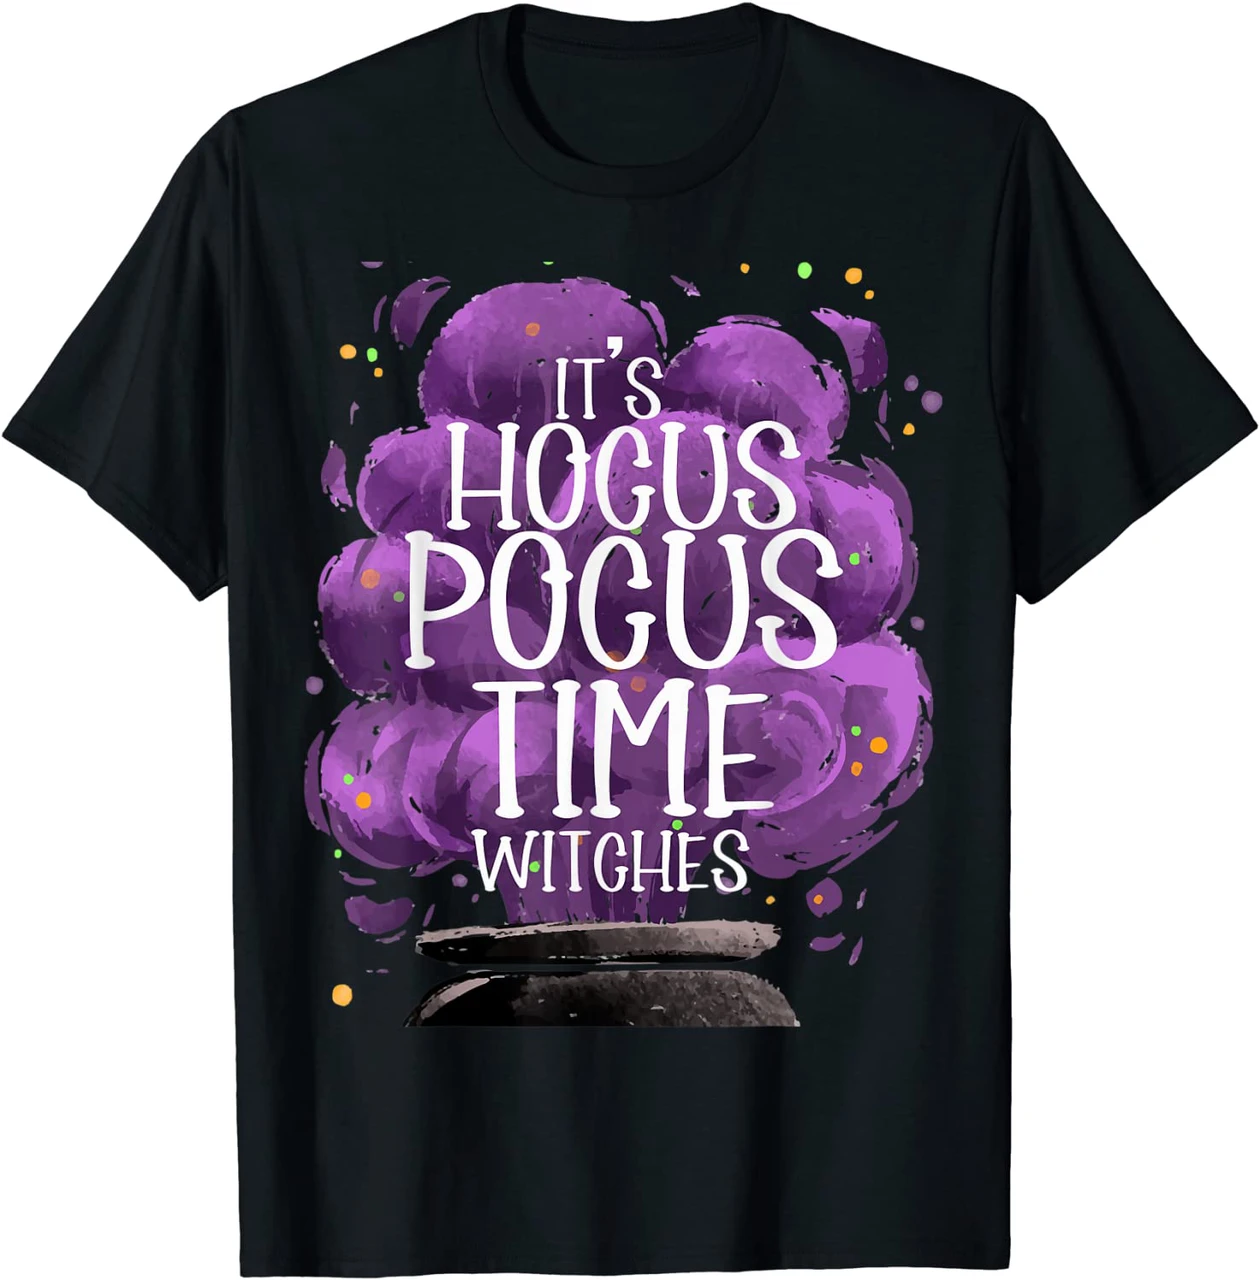 It'S Hocus Pocus Time Witches Cute Witch Shirt